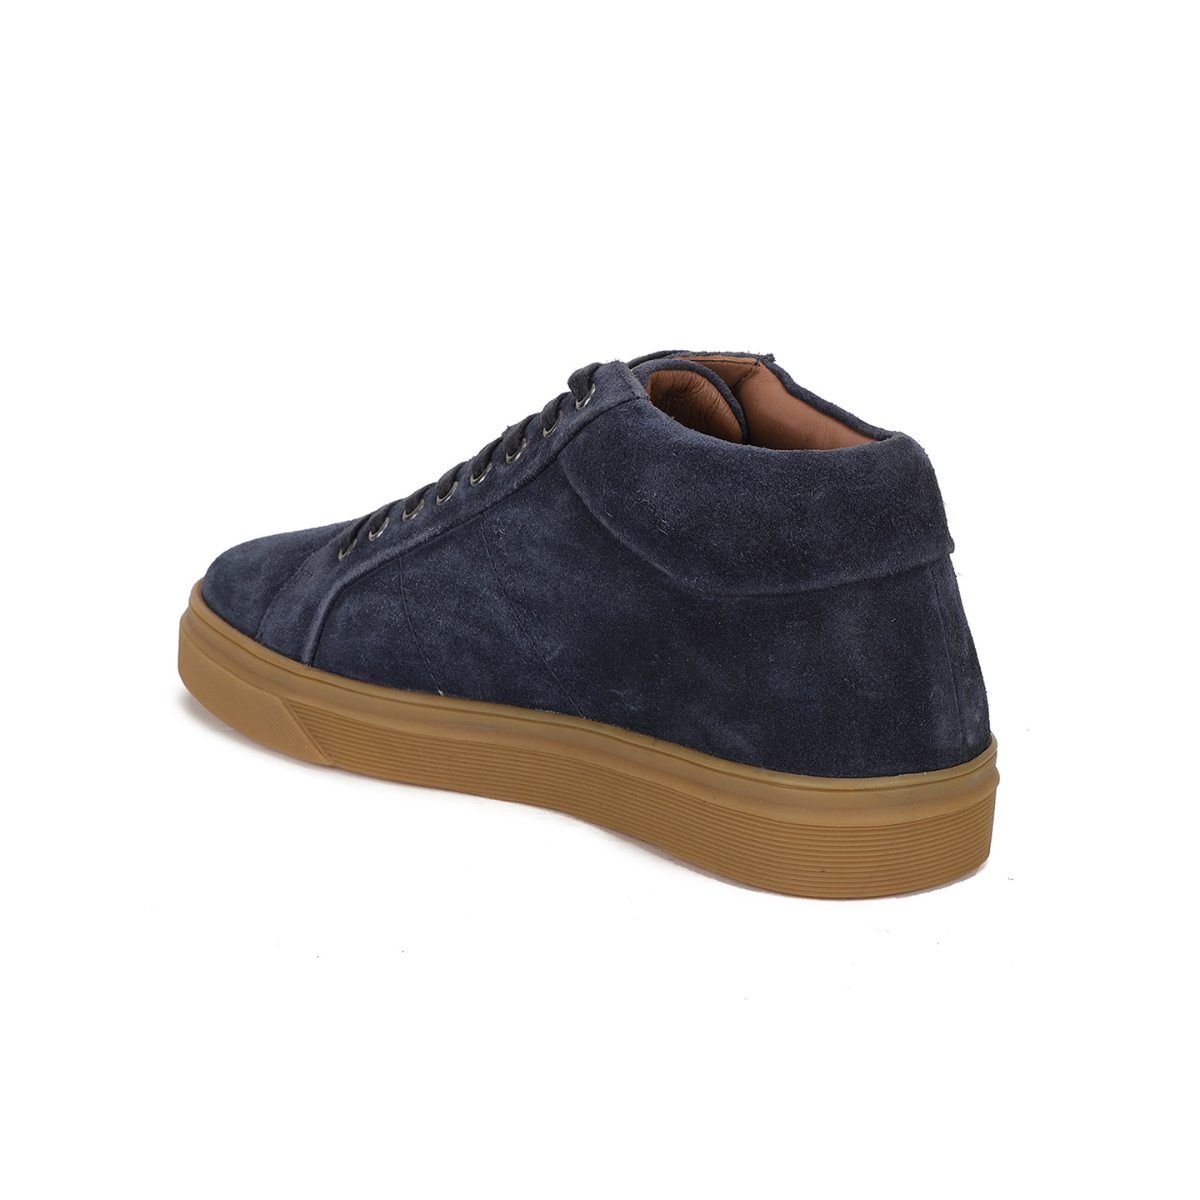 Buy Woodland Woodland Men Navy Blue Solid Canvas Sneakers at Redfynd